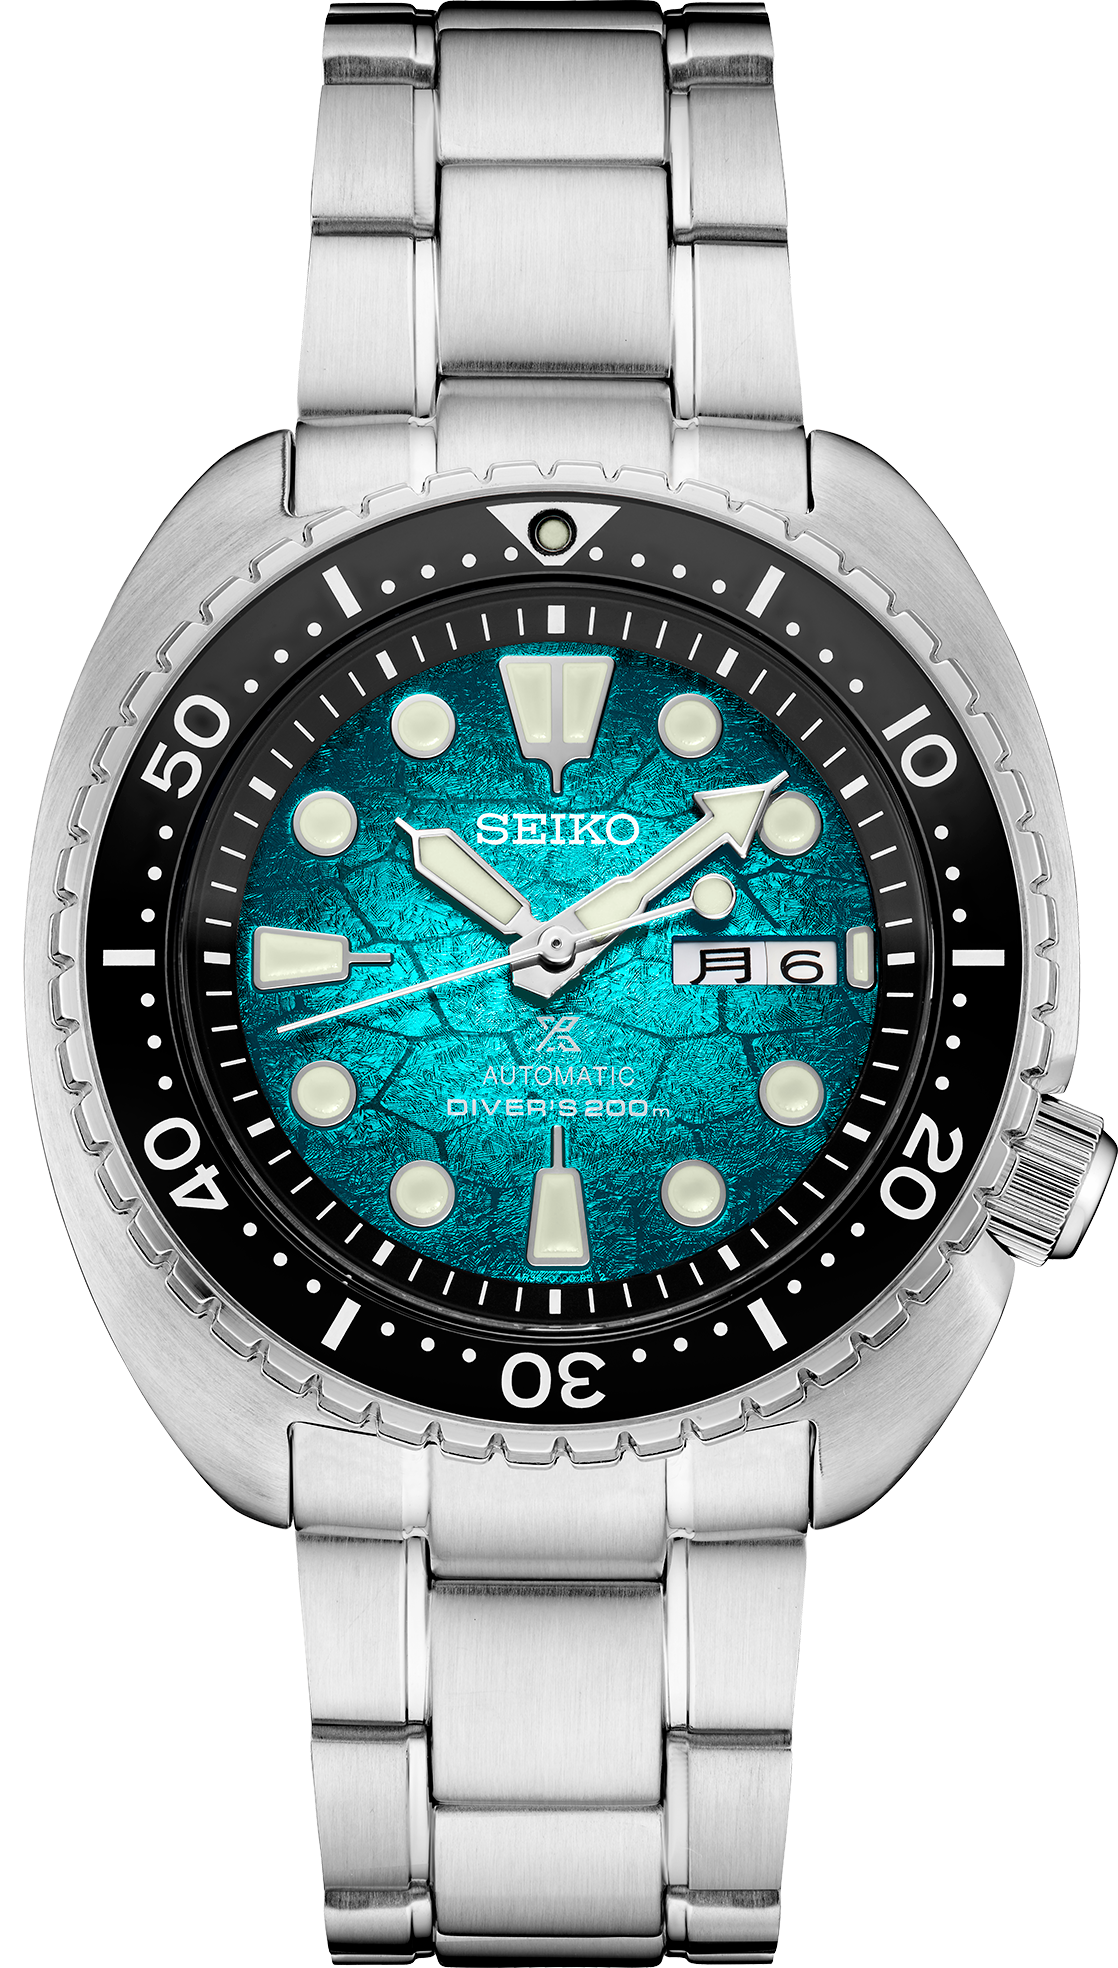 Seiko SRPH57 Prospex U.S. Special Edition Automatic Stainless Steel Watch